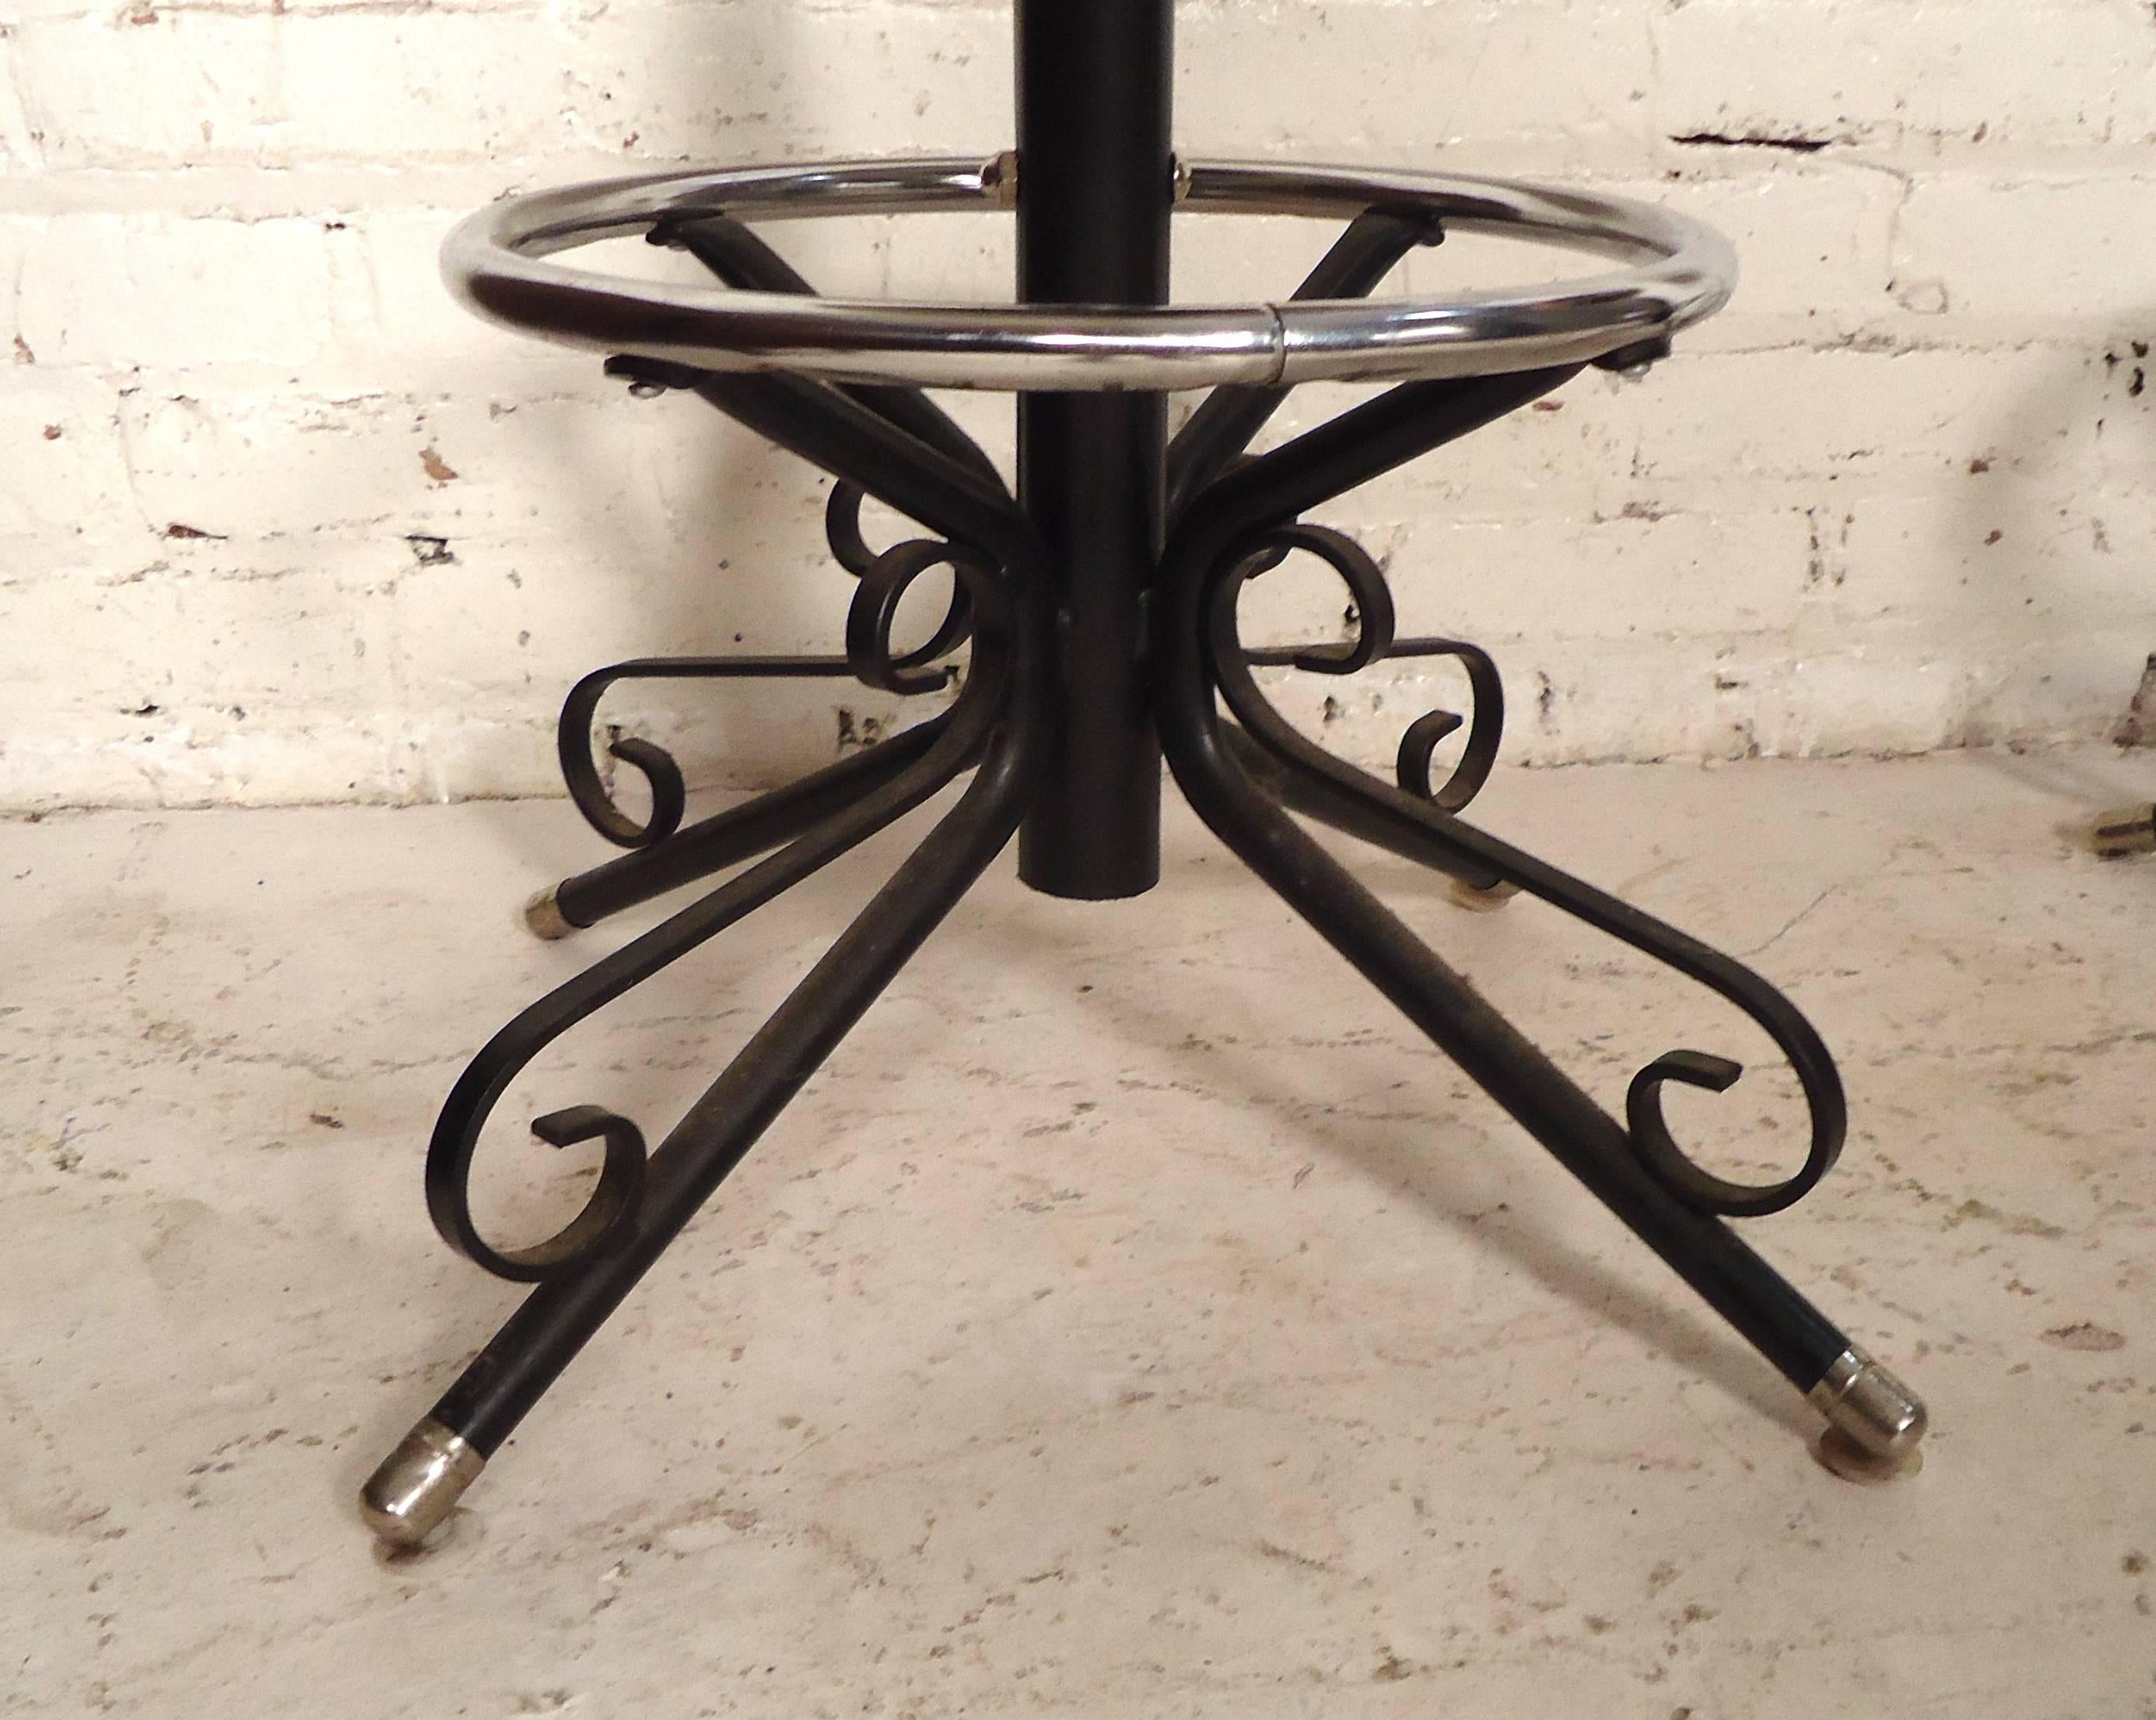 Three swivel stools with a strong iron frame desgined by Arthur Umanoff for Shaver Howard's 